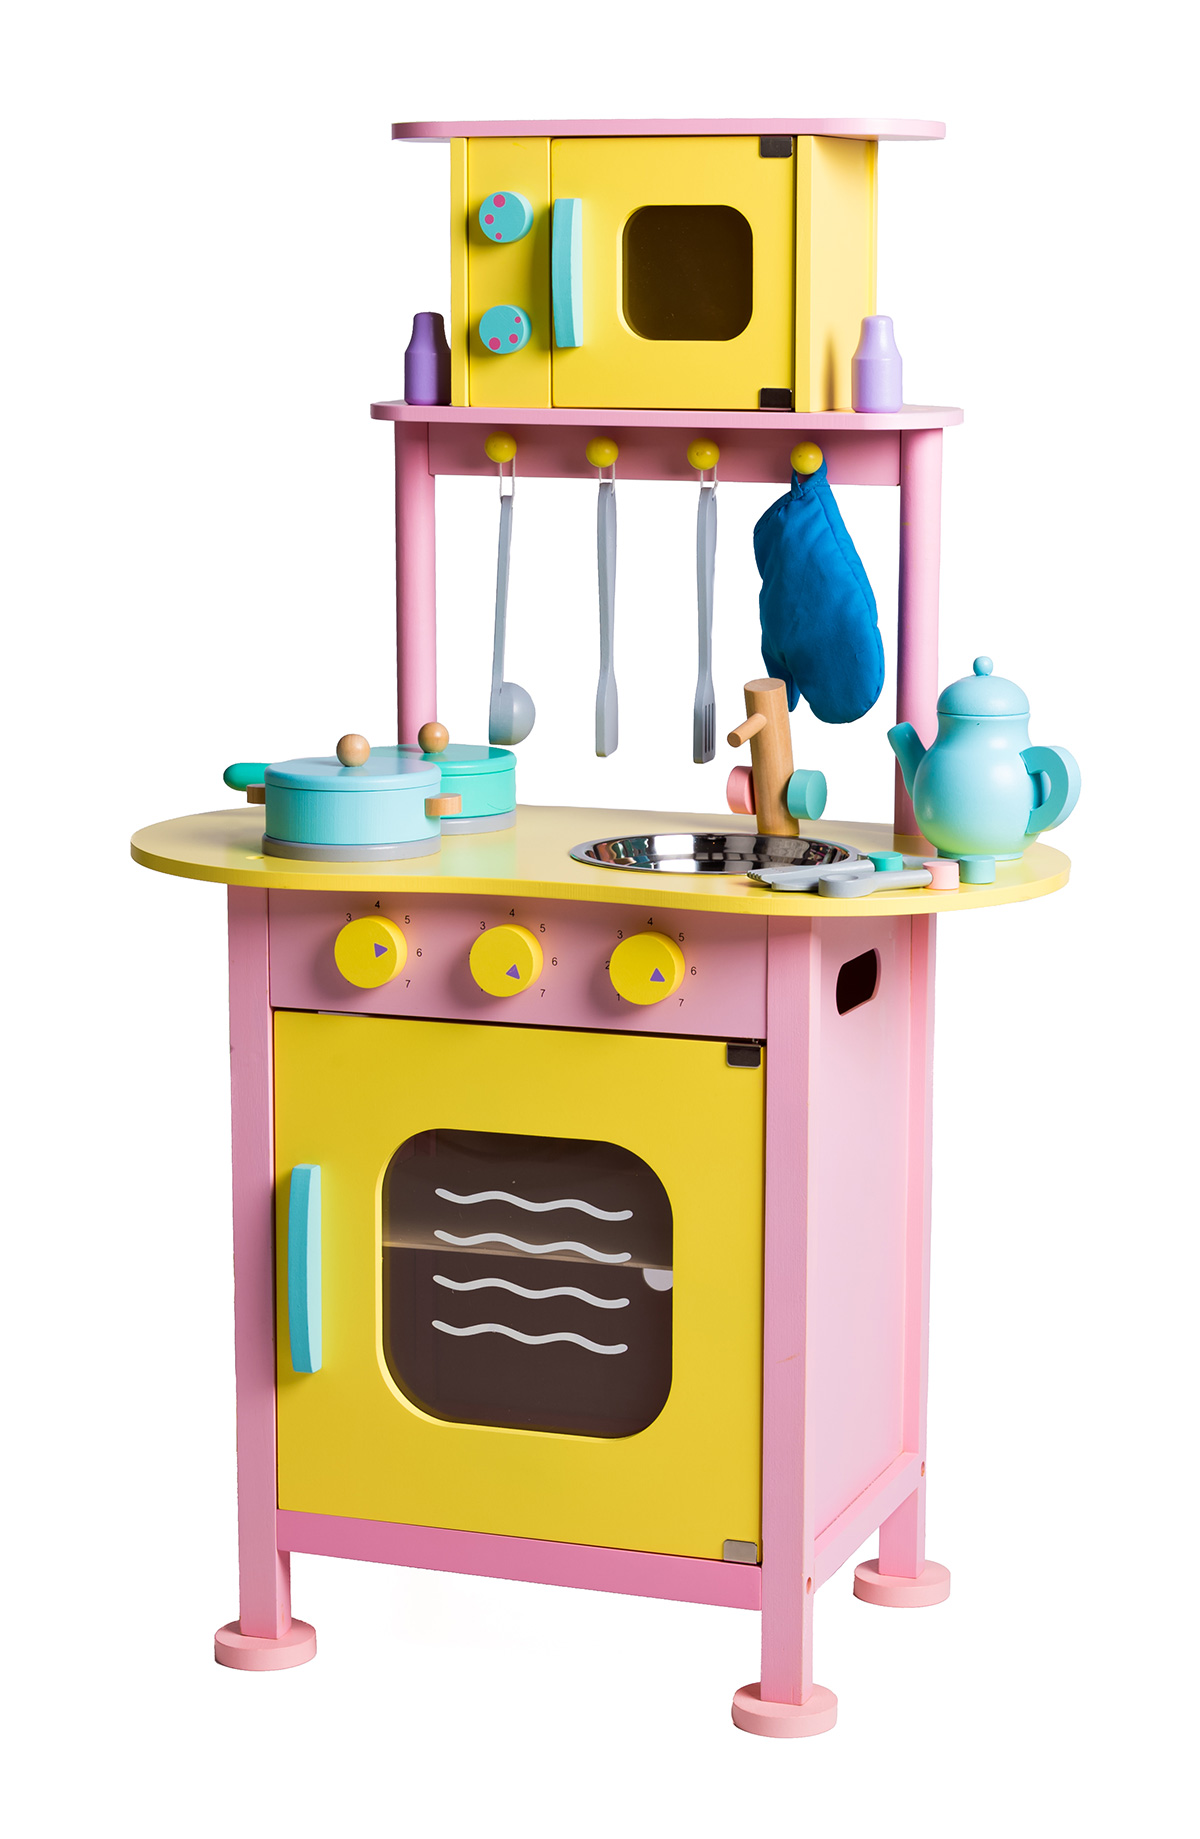 Wooden Play Kitchen complete with 14 kitchen utensils and play food accessories